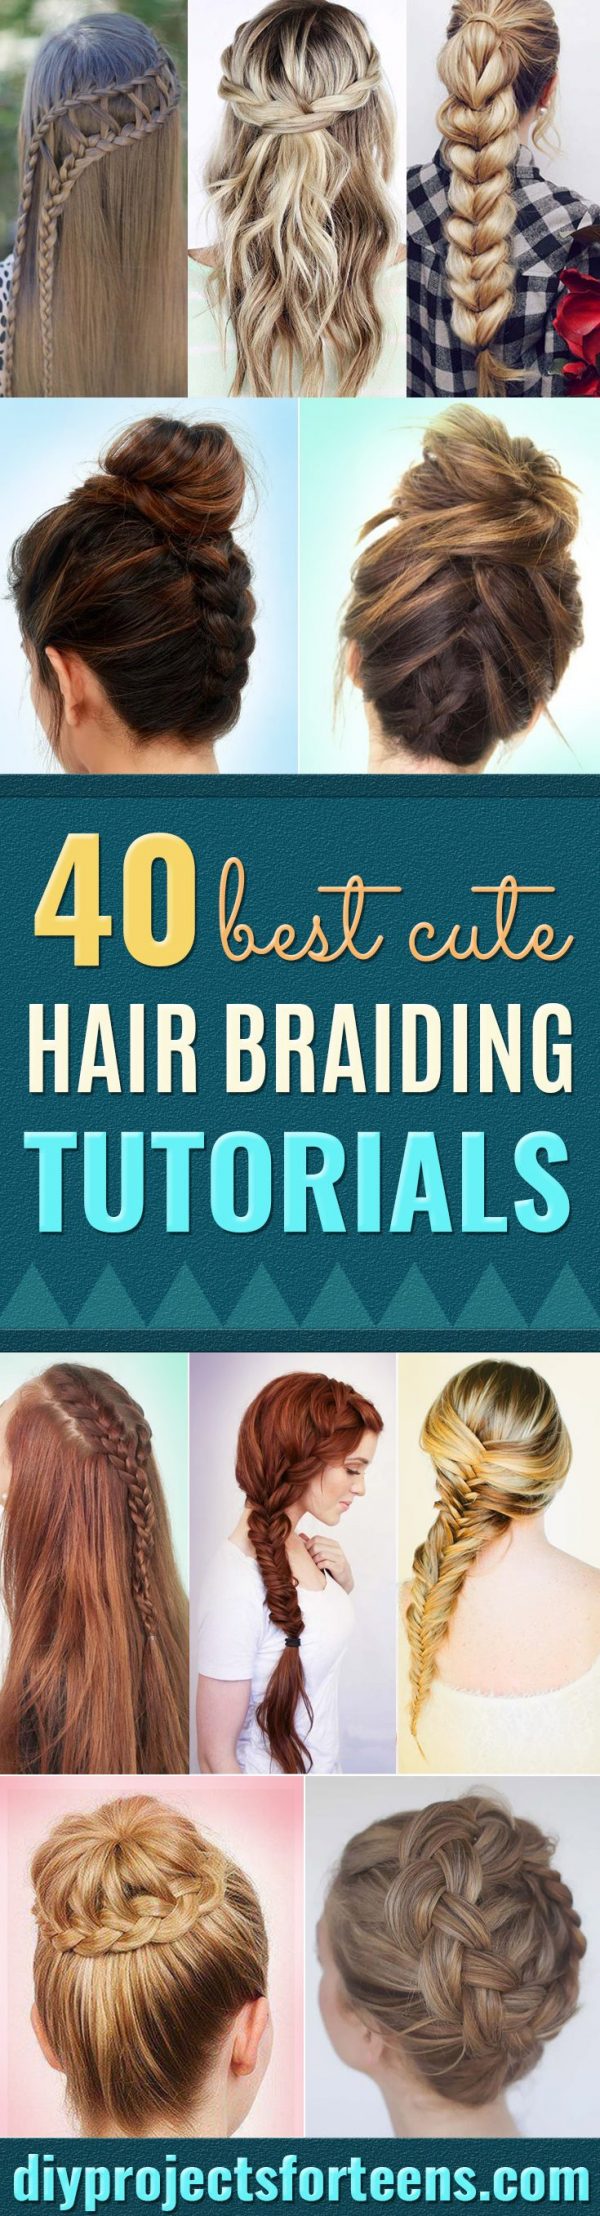 Best Hair Braiding Tutorials - Easy Step by Step Tutorials for Braids - How To Braid Fishtail, French Braids, Flower Crown, Side Braids, Cornrows, Updos - Cool Braided Hairstyles for Girls, Teens and Women - School, Day and Evening, Boho, Casual and Formal Looks #hairstyles #braiding #braidingtutorials #diyhair